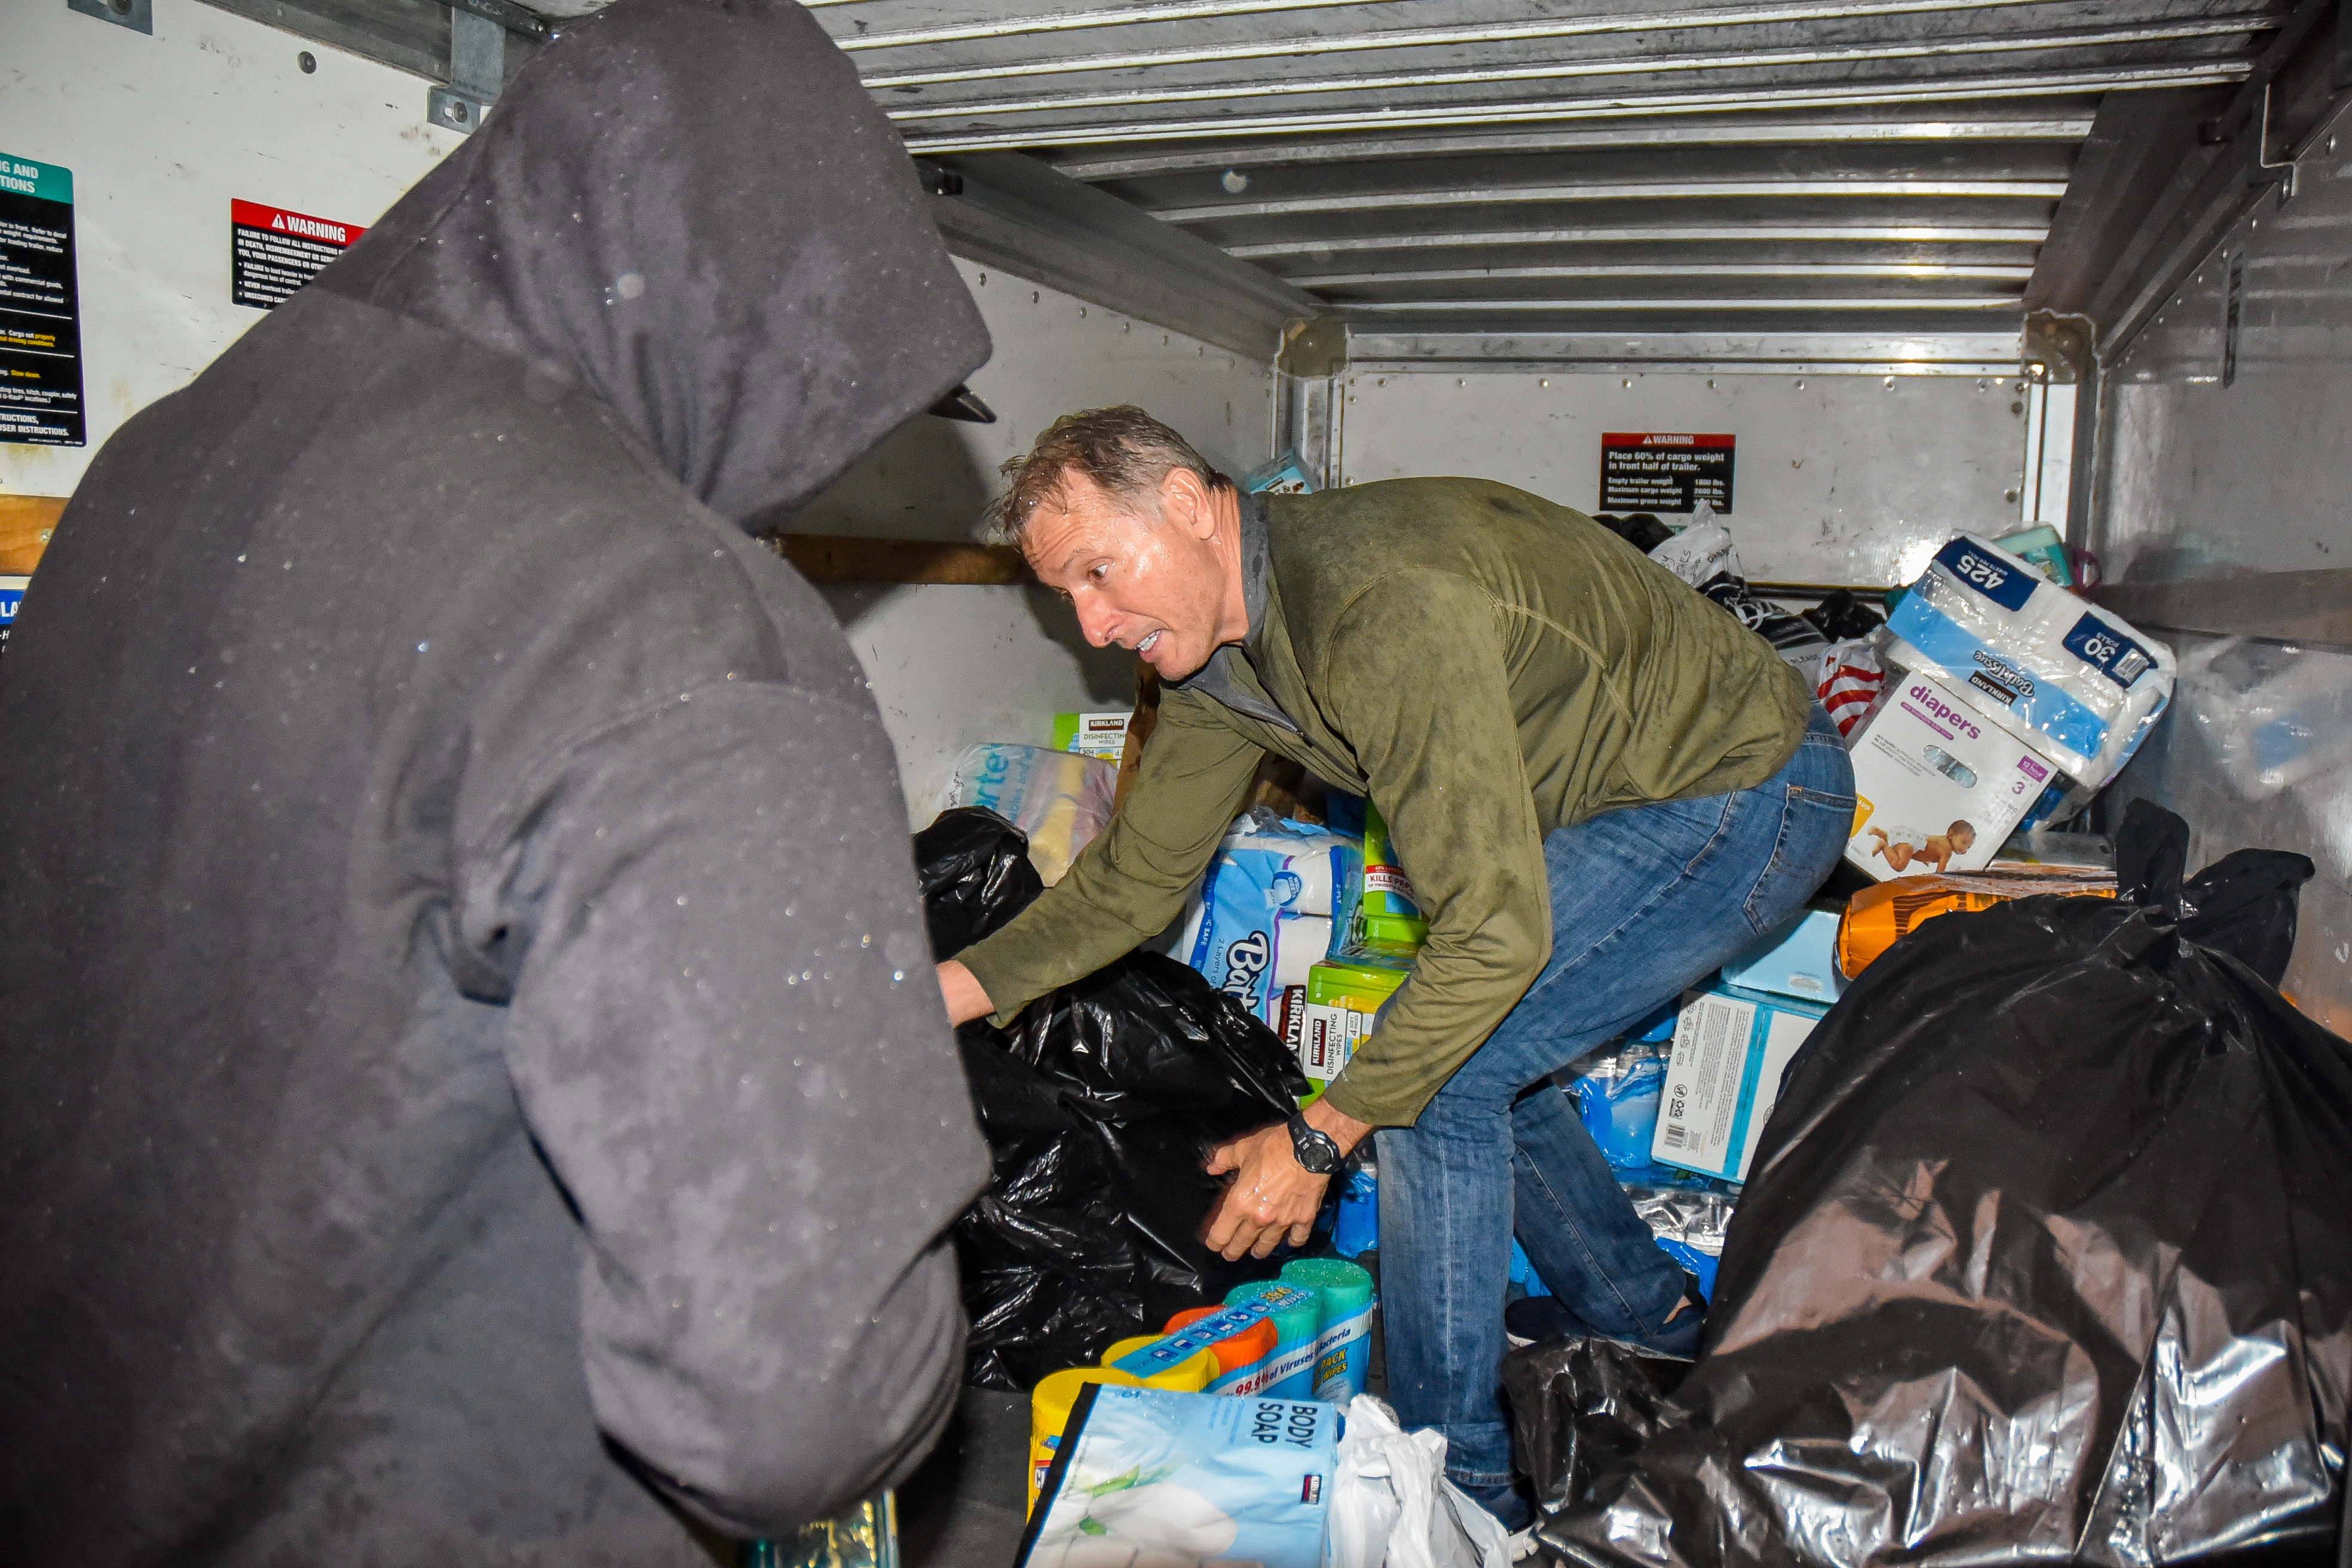 San Joaquin Delta College counselor Rocky LaJeunesse helps fill a trailer with donated items for fire victims.